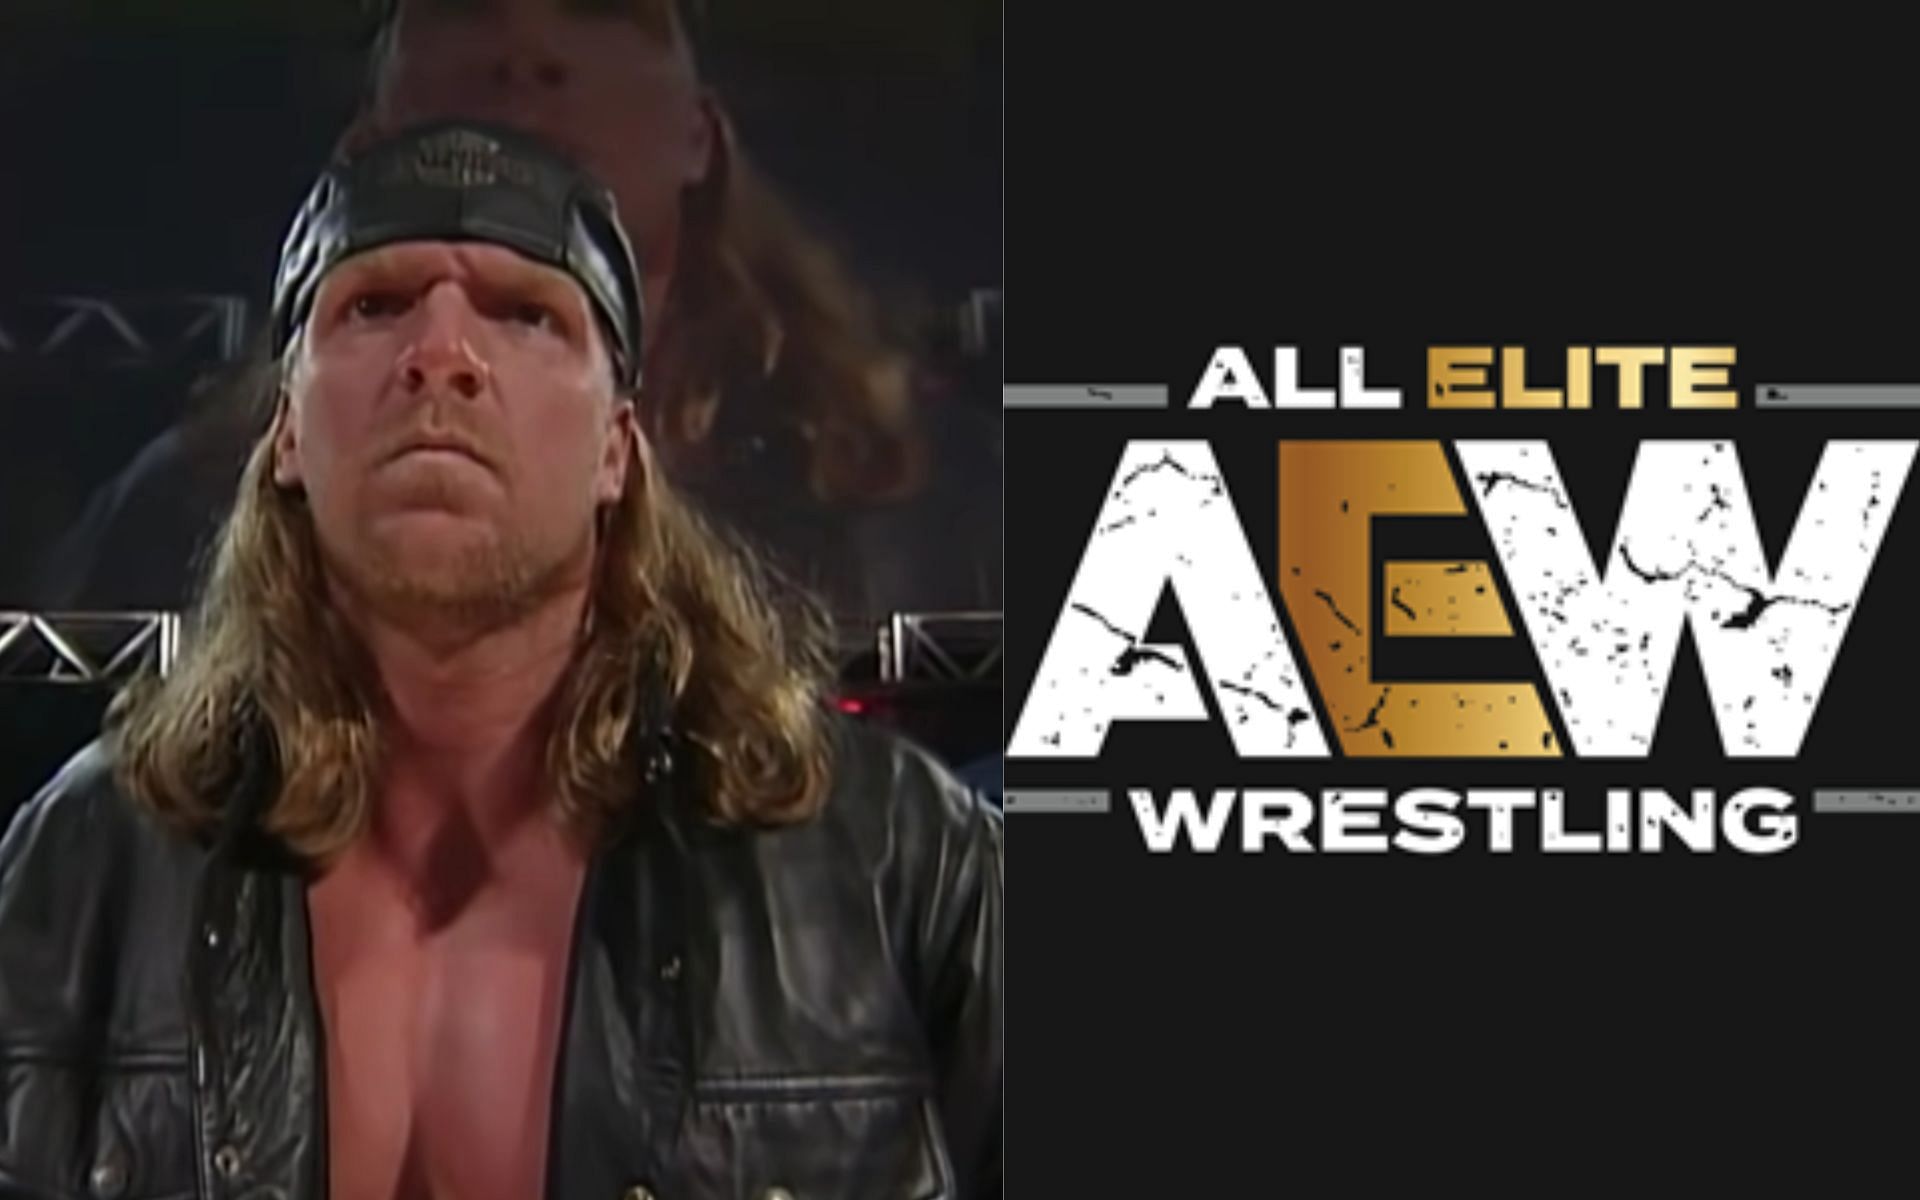 This AEW star wears a hat similar to WWE legend Triple H used to.